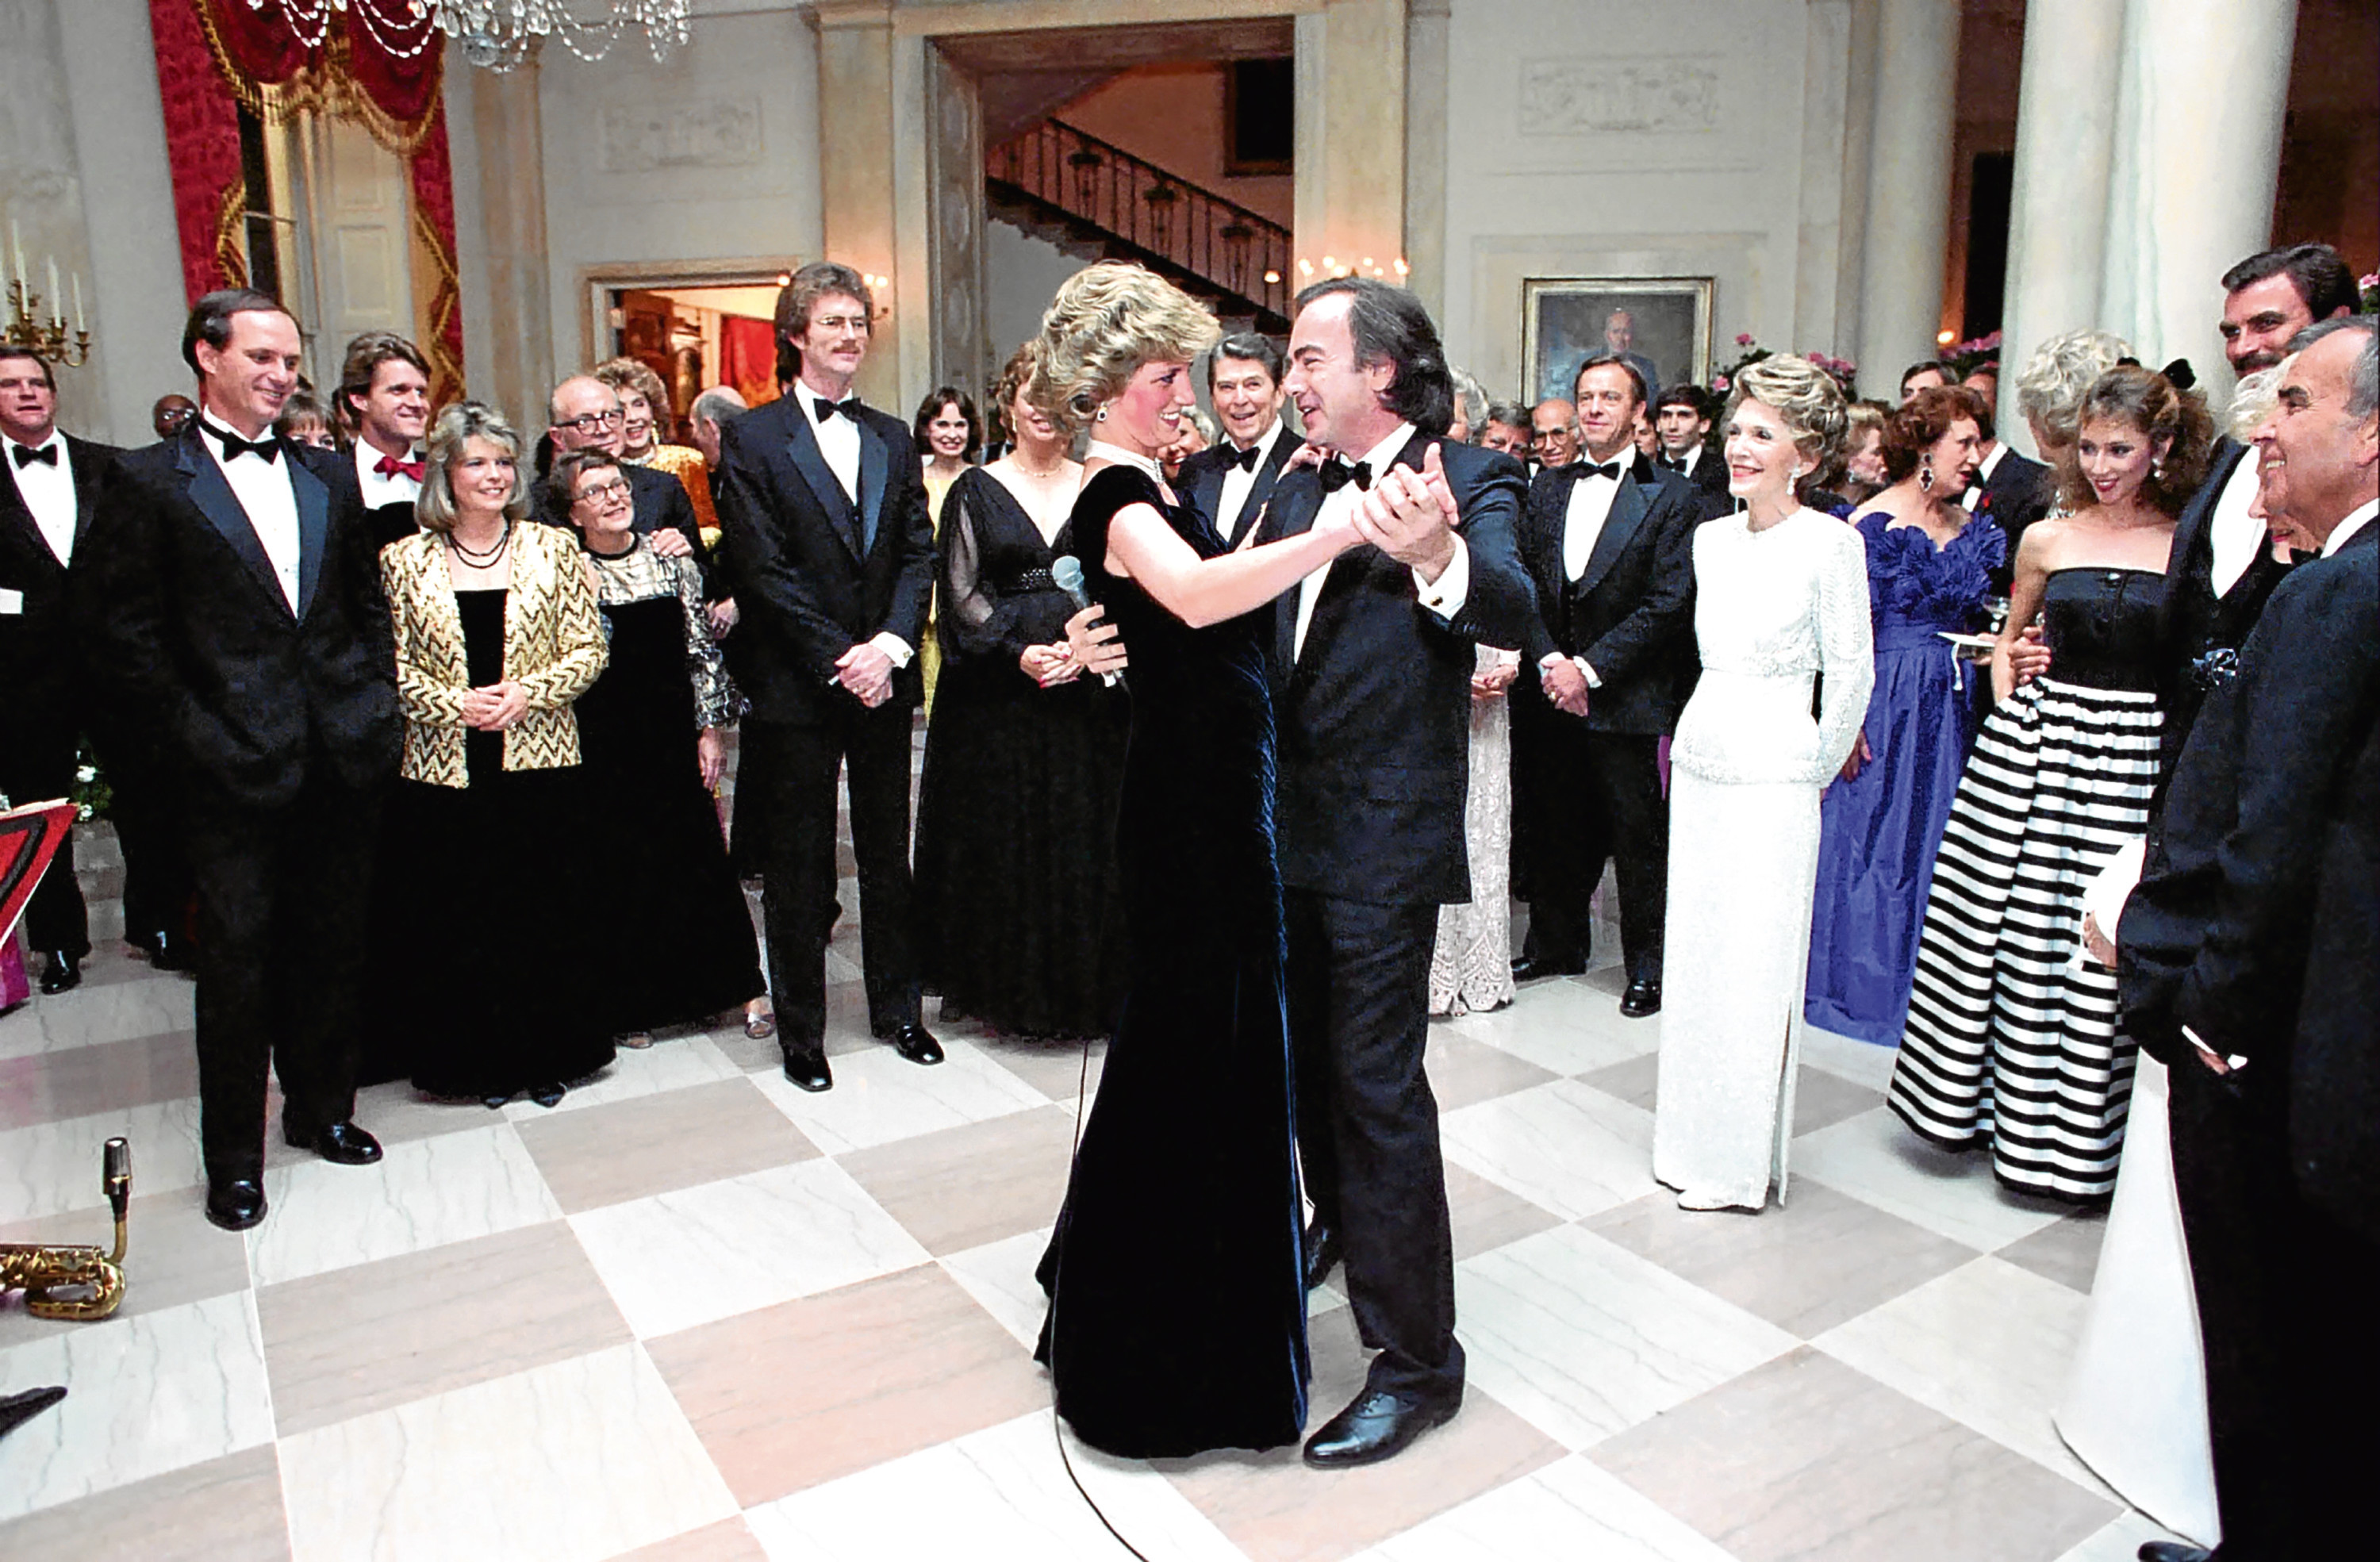 Diana, Princess of Wales dances with singer Neil Diamond during a White House Gala Dinner November 9, 1985 in Washington, DC (Alamy)